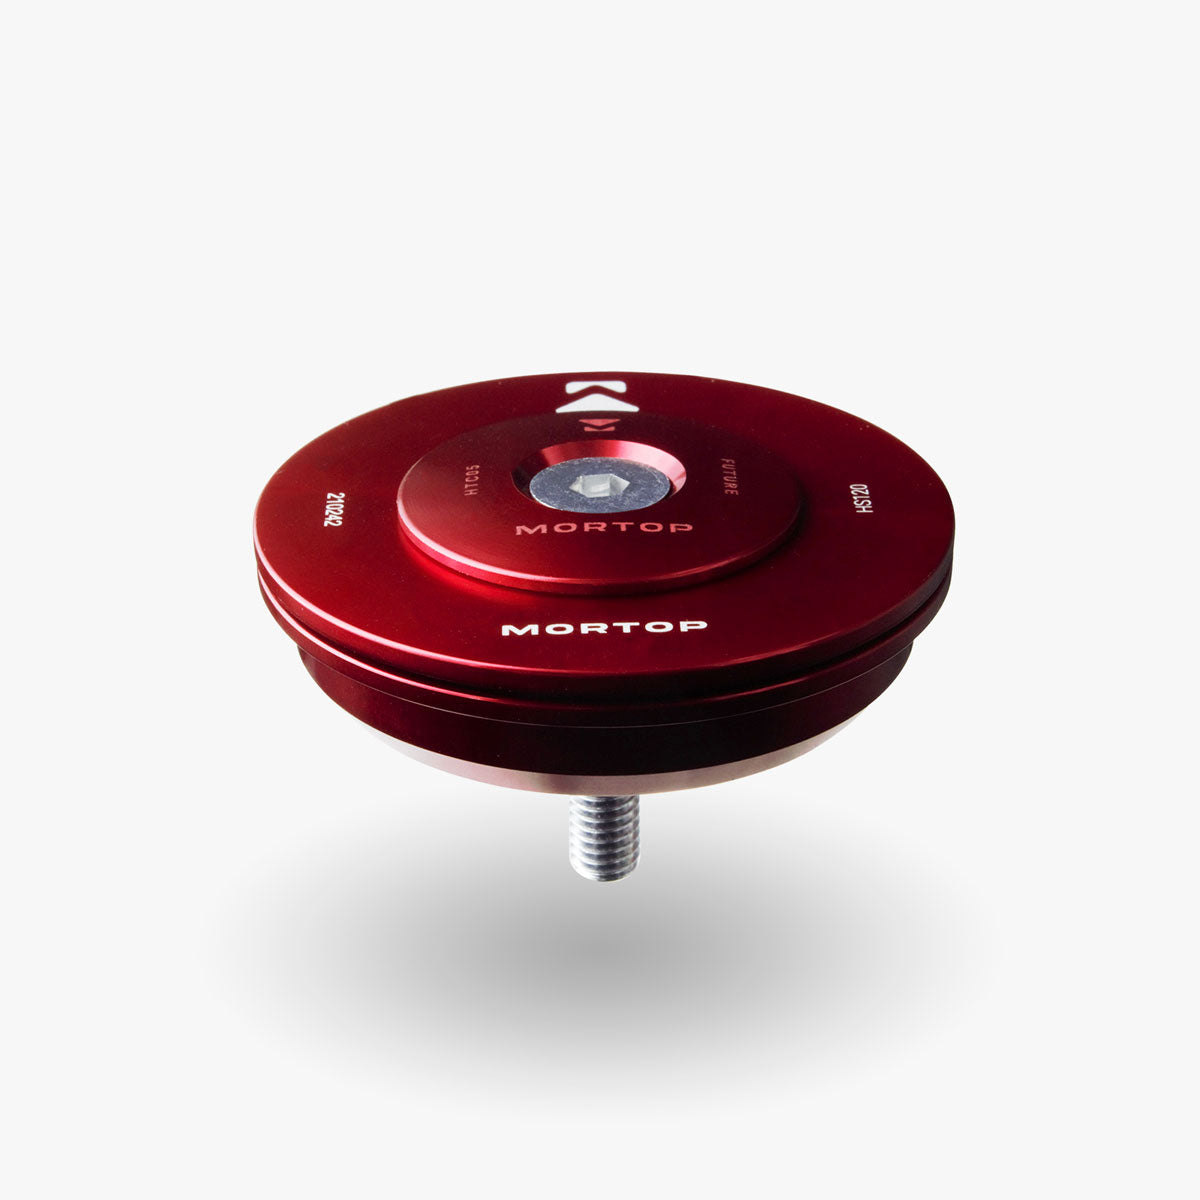 Horizon-ZS-Headset-HS120-Top-red